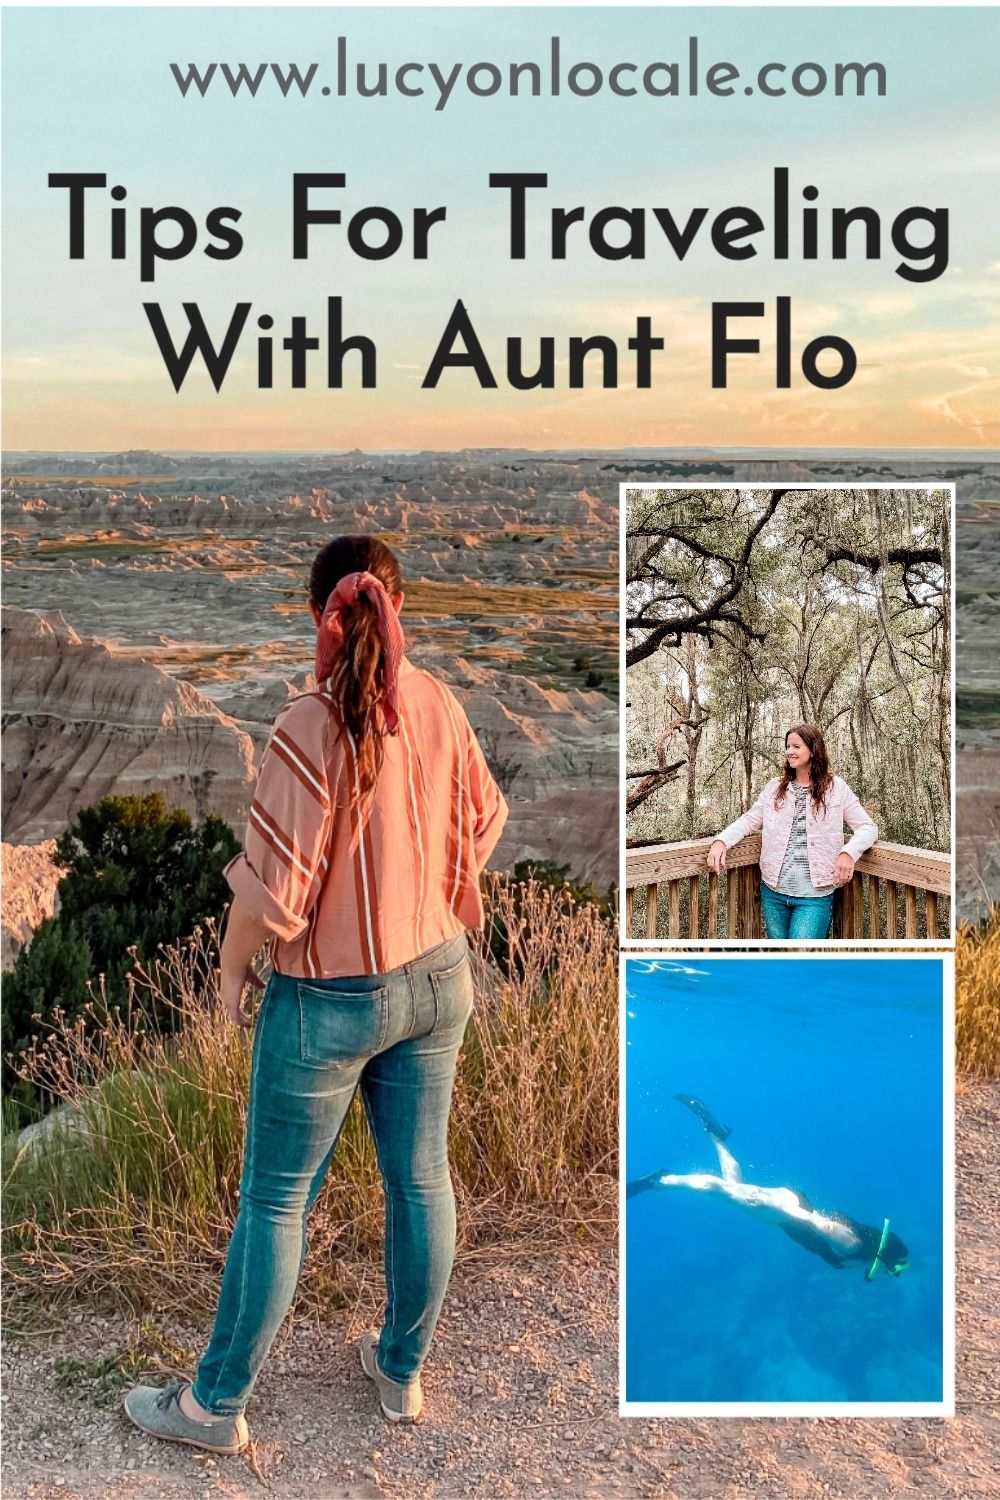 Tips for Traveling With Aunt Flo